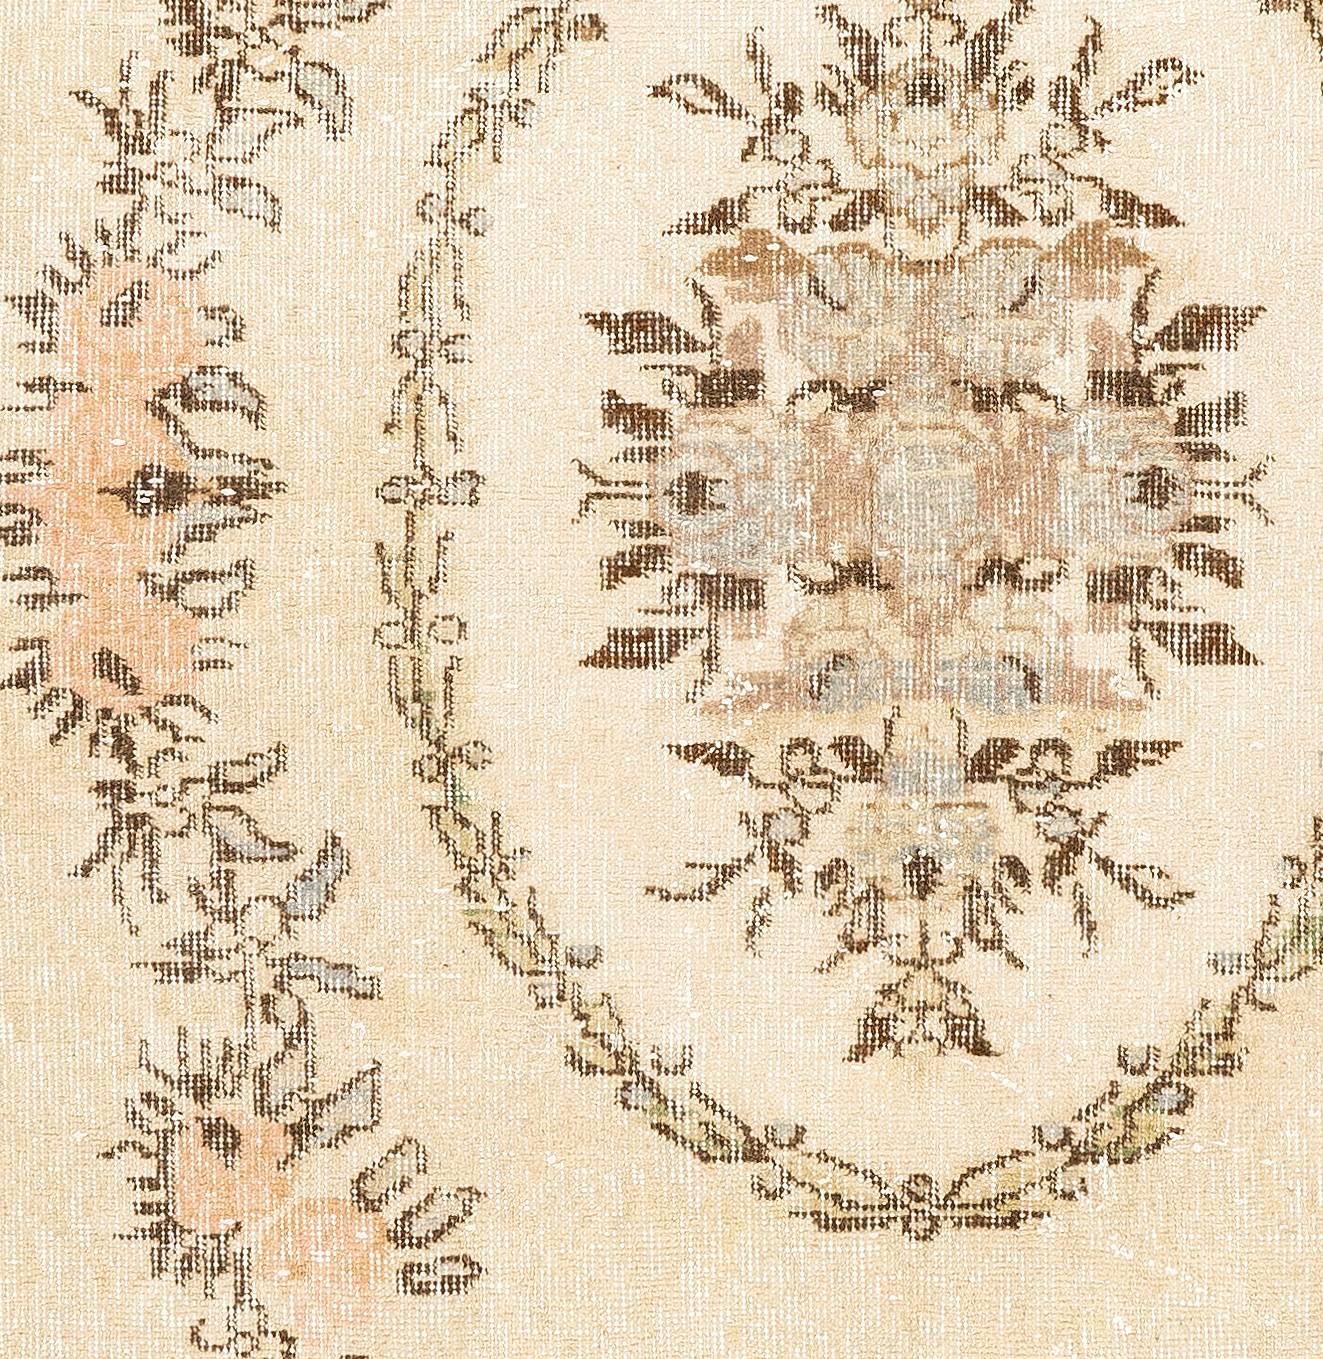 A finely hand-knotted vintage Turkish rug from the 1960s featuring a French-Aubusson inspired floral wreath design in soft peach, light blue, taupe gray and brown against a warm beige background. Size: 4.2 x 7.2 Ft.

The rug has even low wool pile